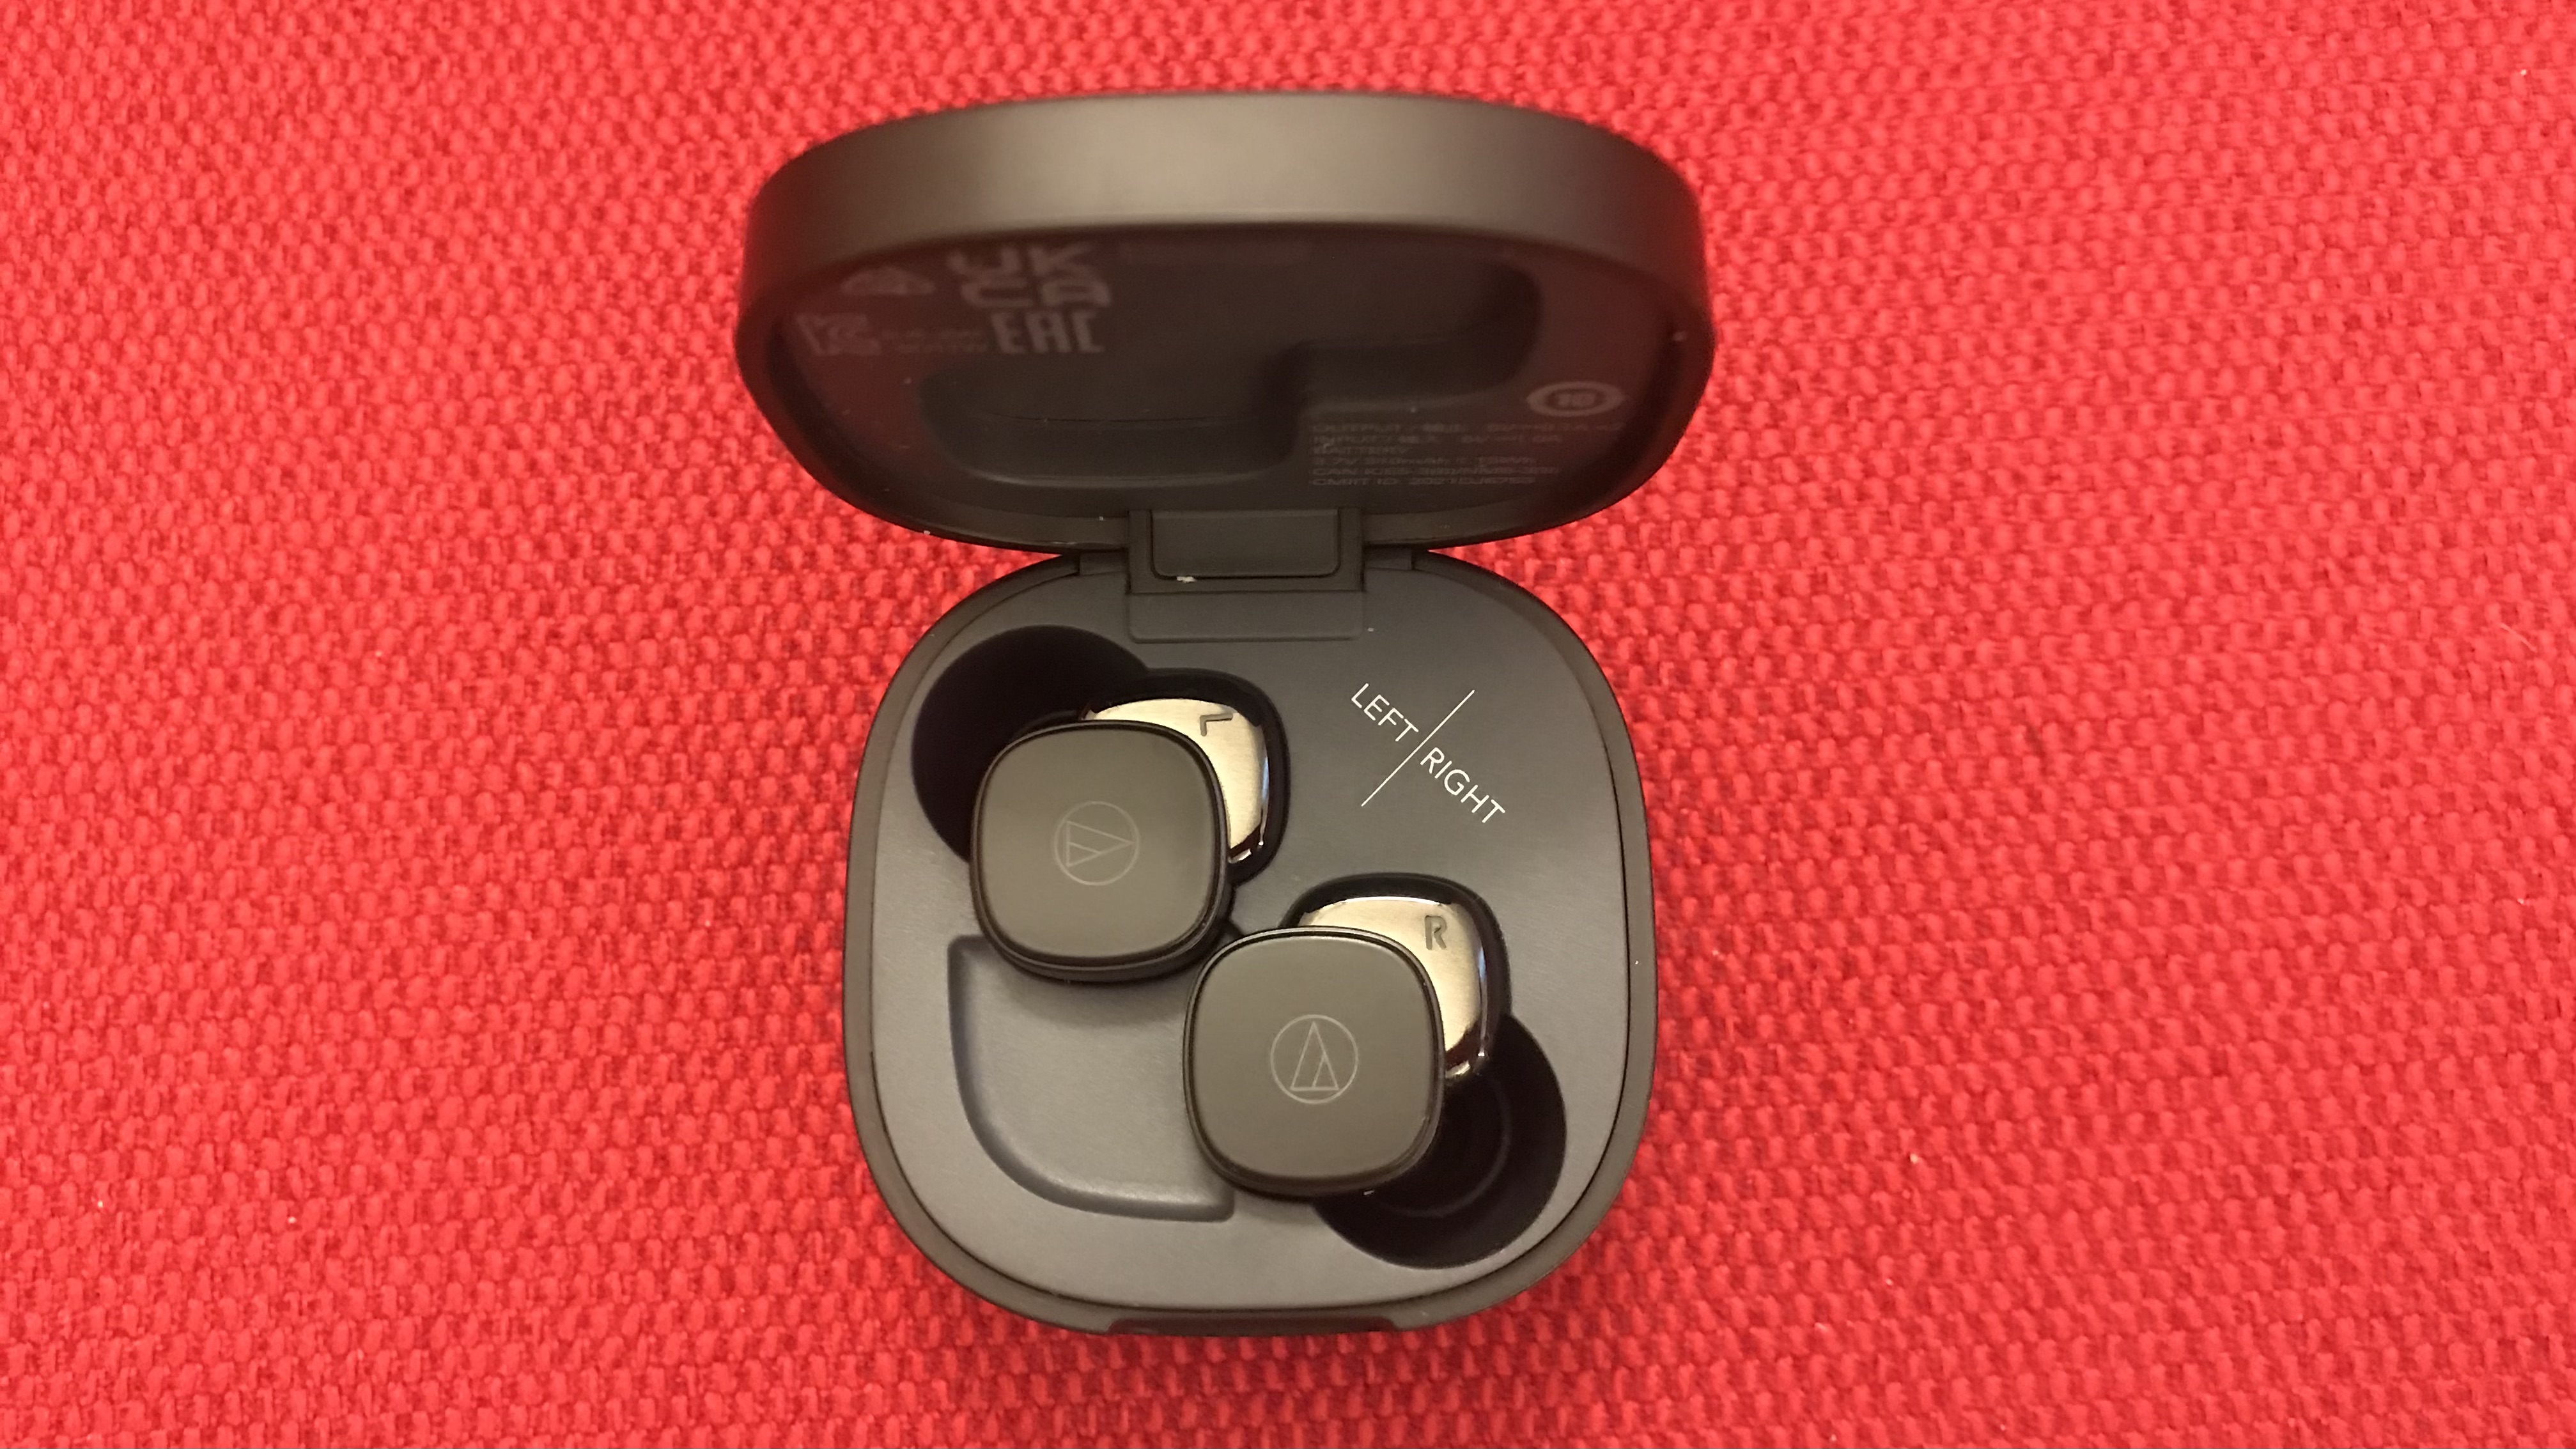 Audio-Technica ATH-SQ1TW earphones and case on red background